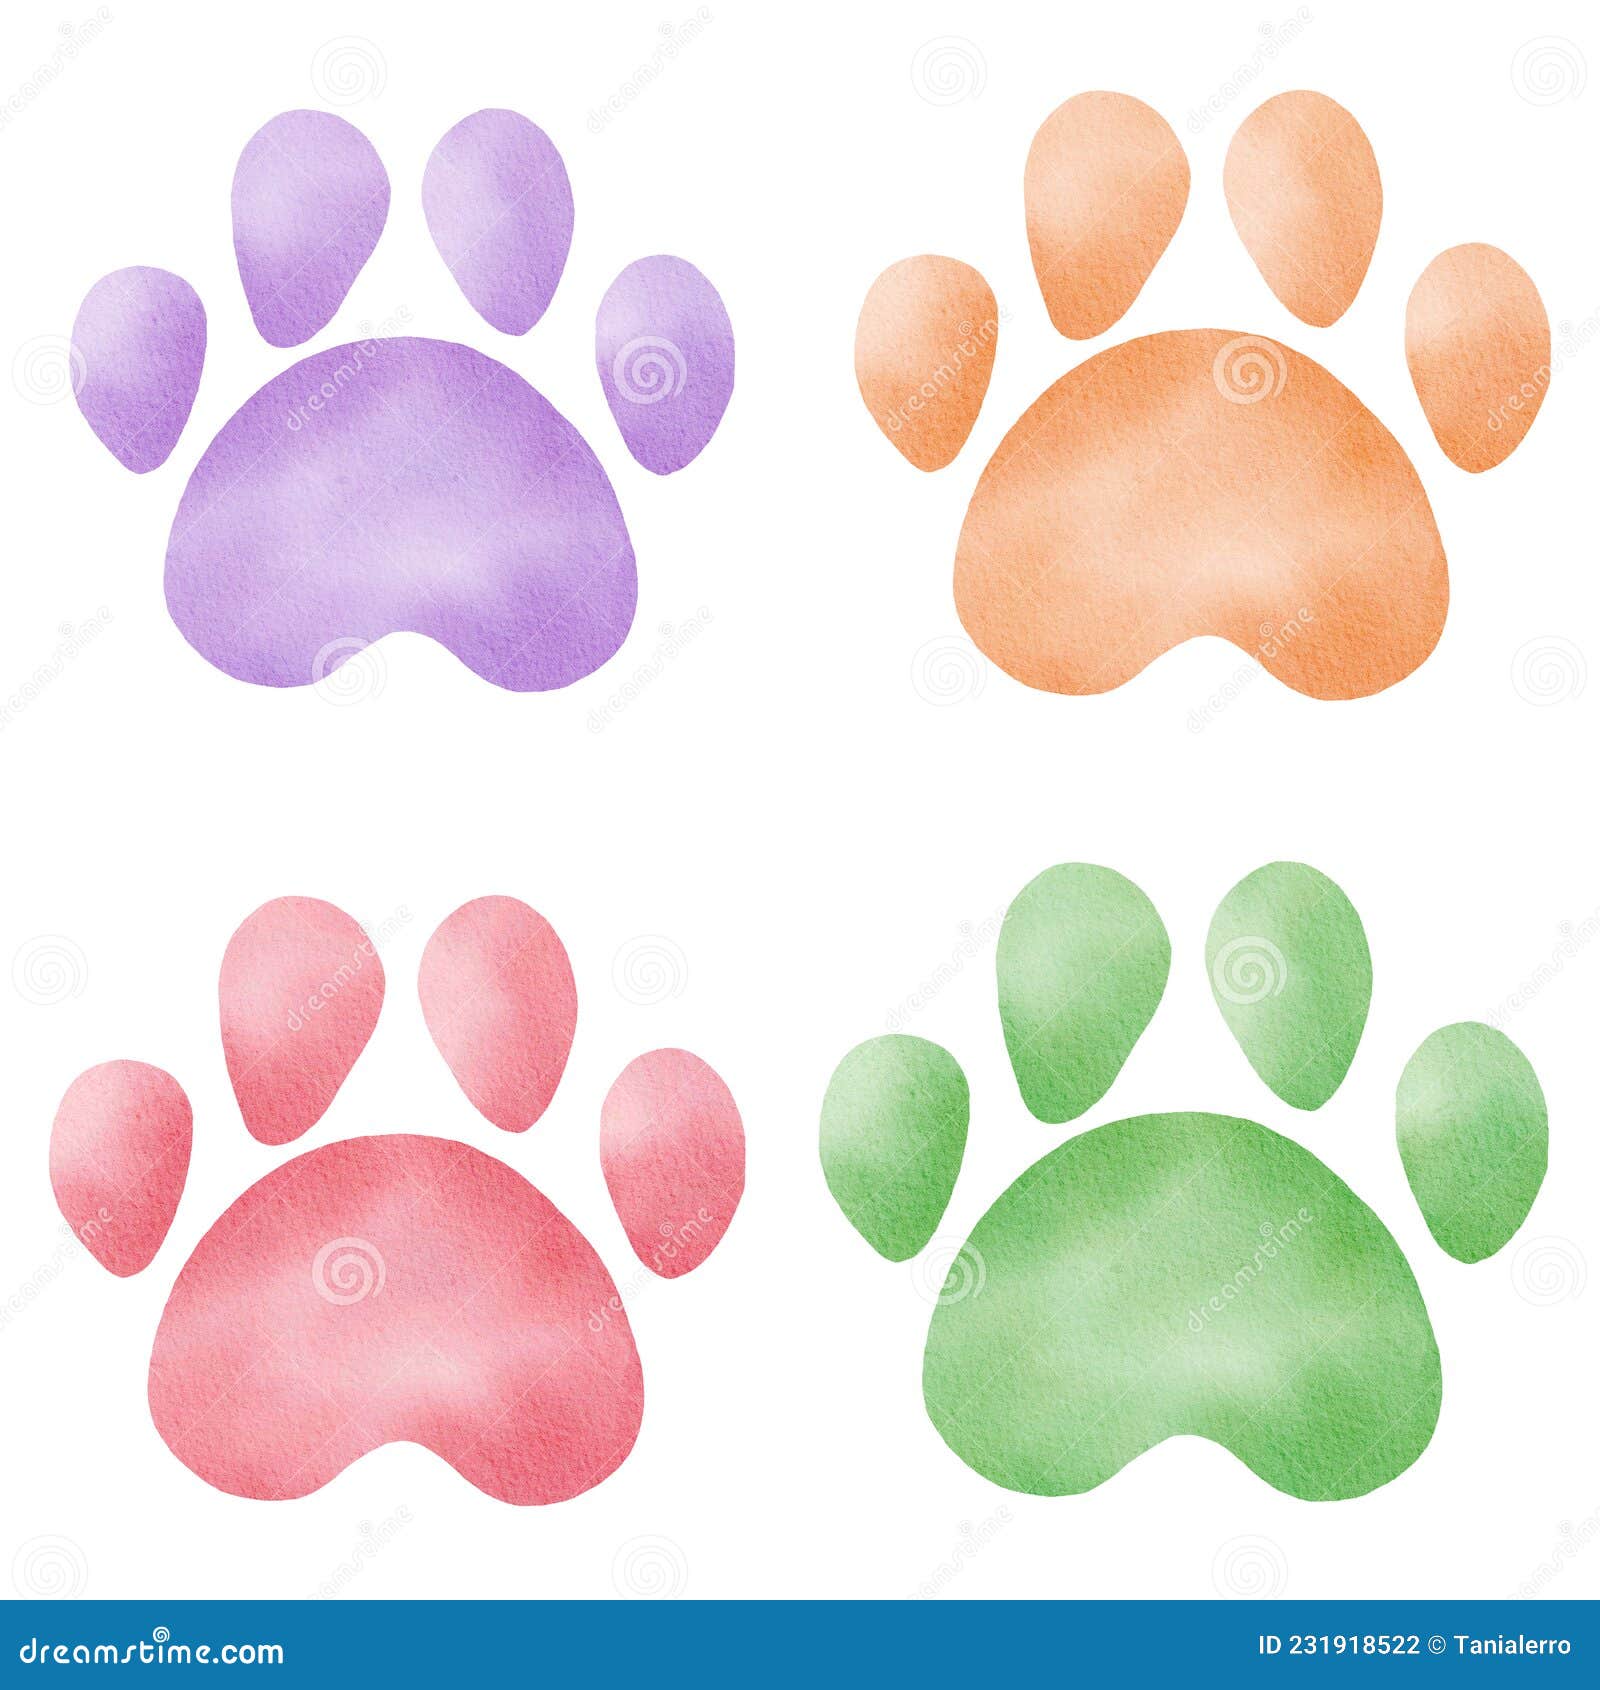 Watercolor Paw Prints. Hand Drawn Clipart. Dog Or Cat Footprints For Diy Projects, Scrapbooking, Nursery Decor. Stock Illustration - Illustration Of Nature, Clipart: 231918522